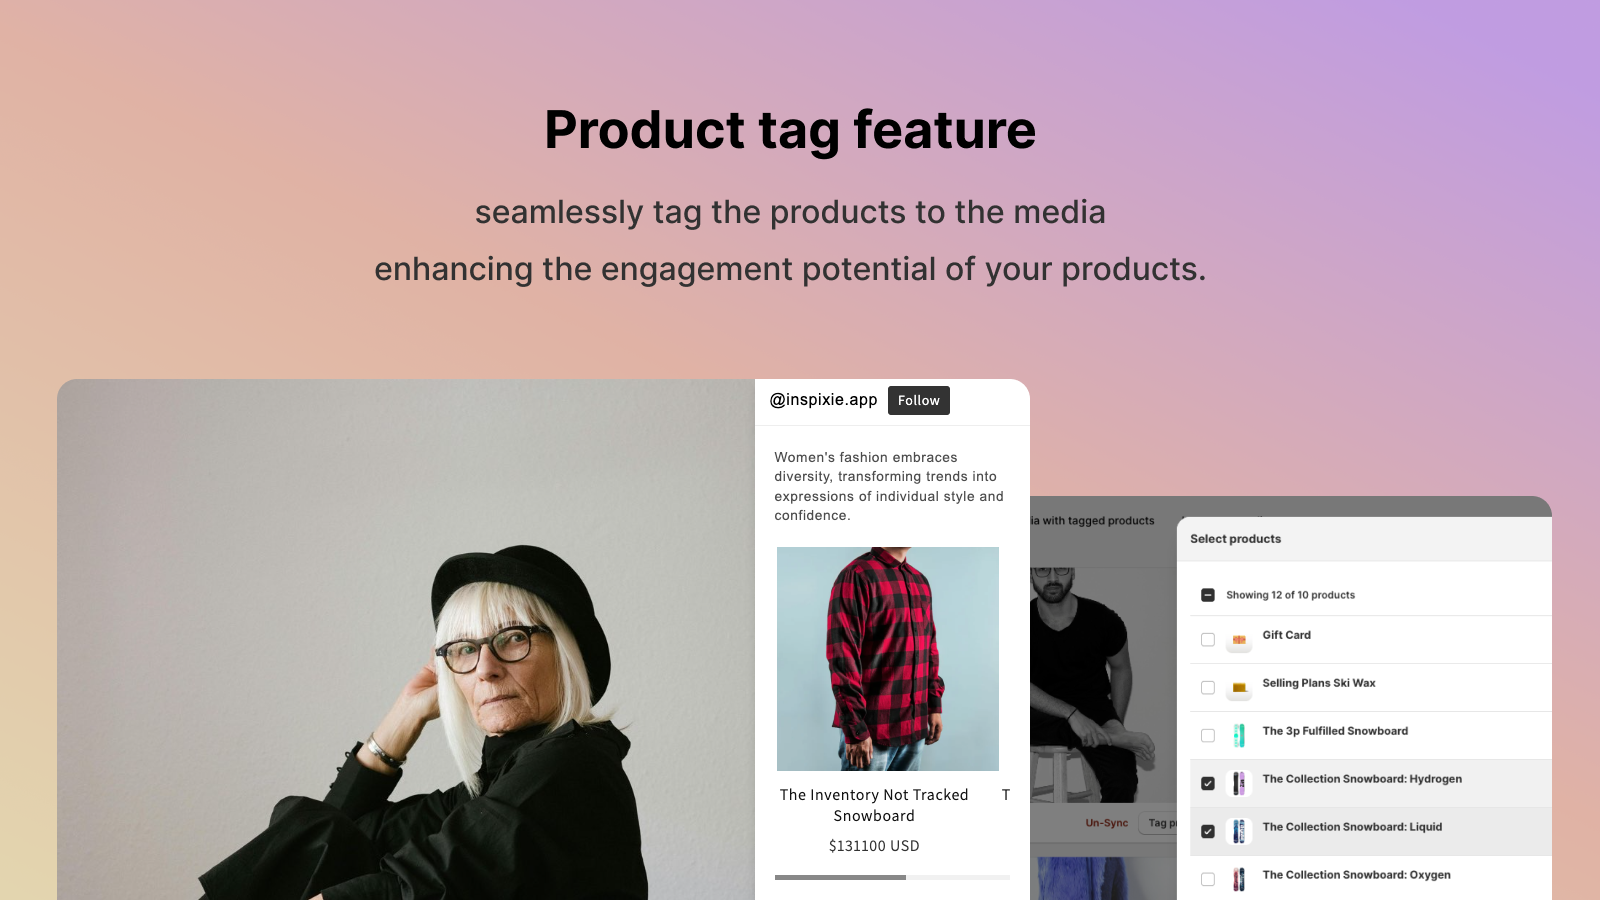 Seamlessly tag the products to the Instagram media